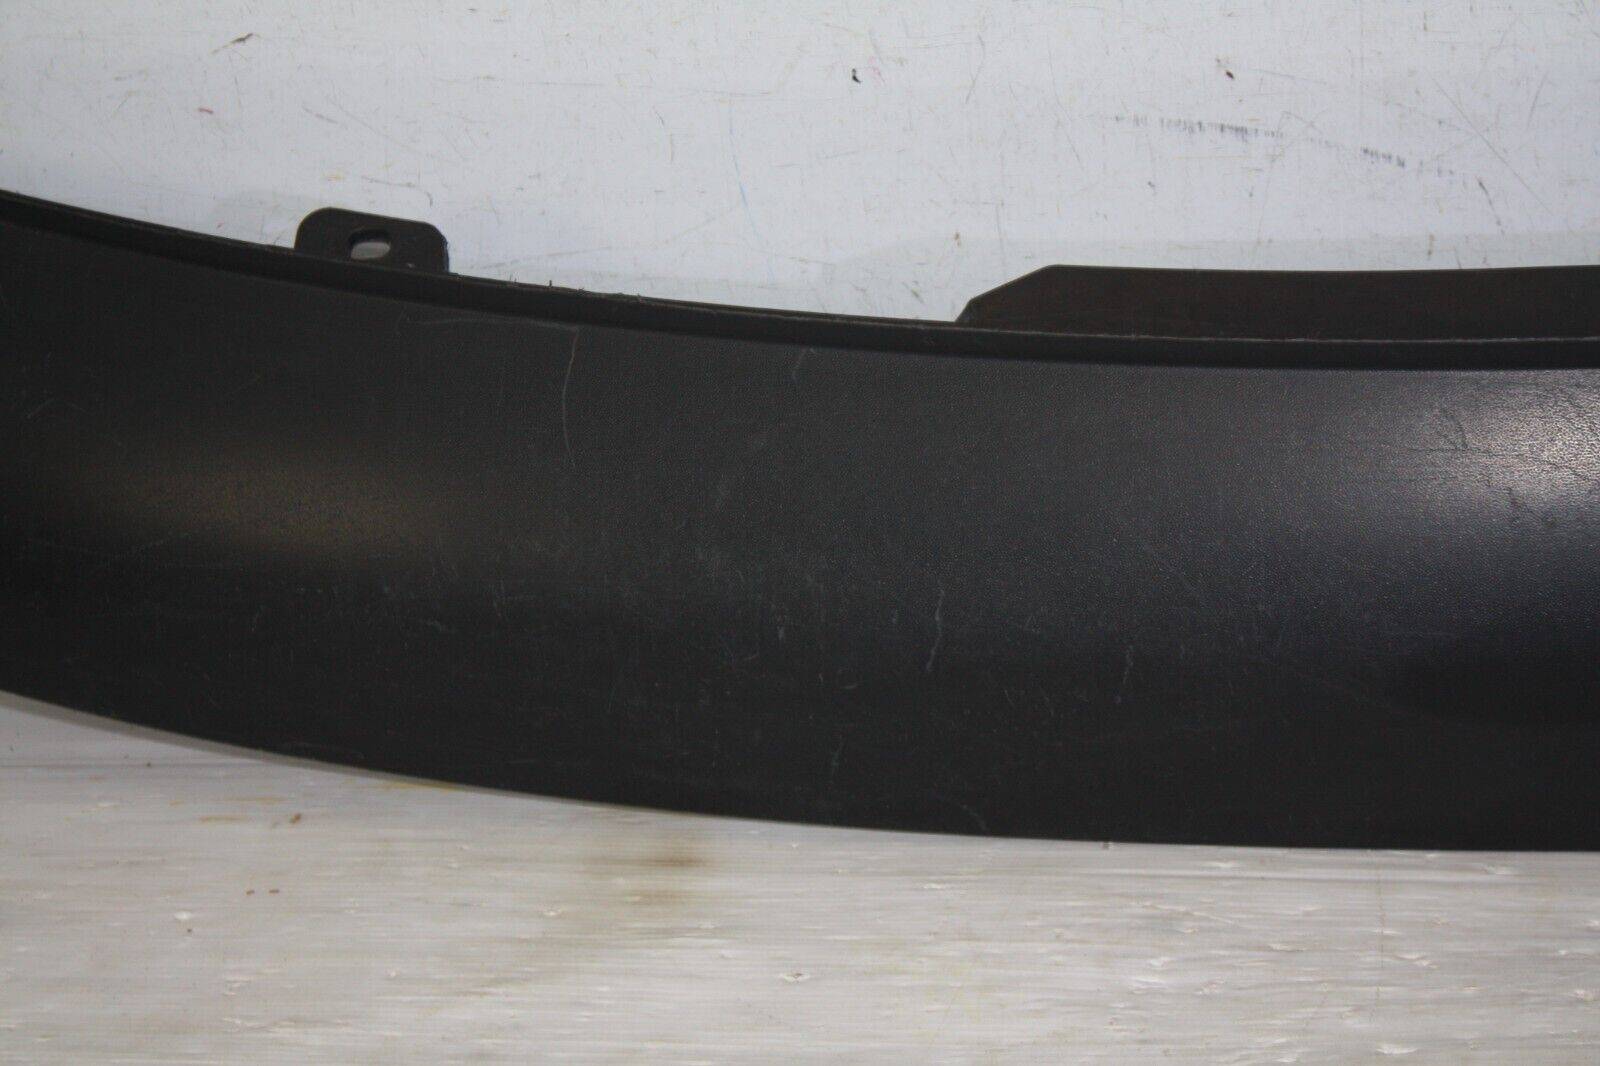 VW-Polo-Rear-Bumper-Lower-Section-2002-To-2005-6Q6807521-Genuine-176093468813-5